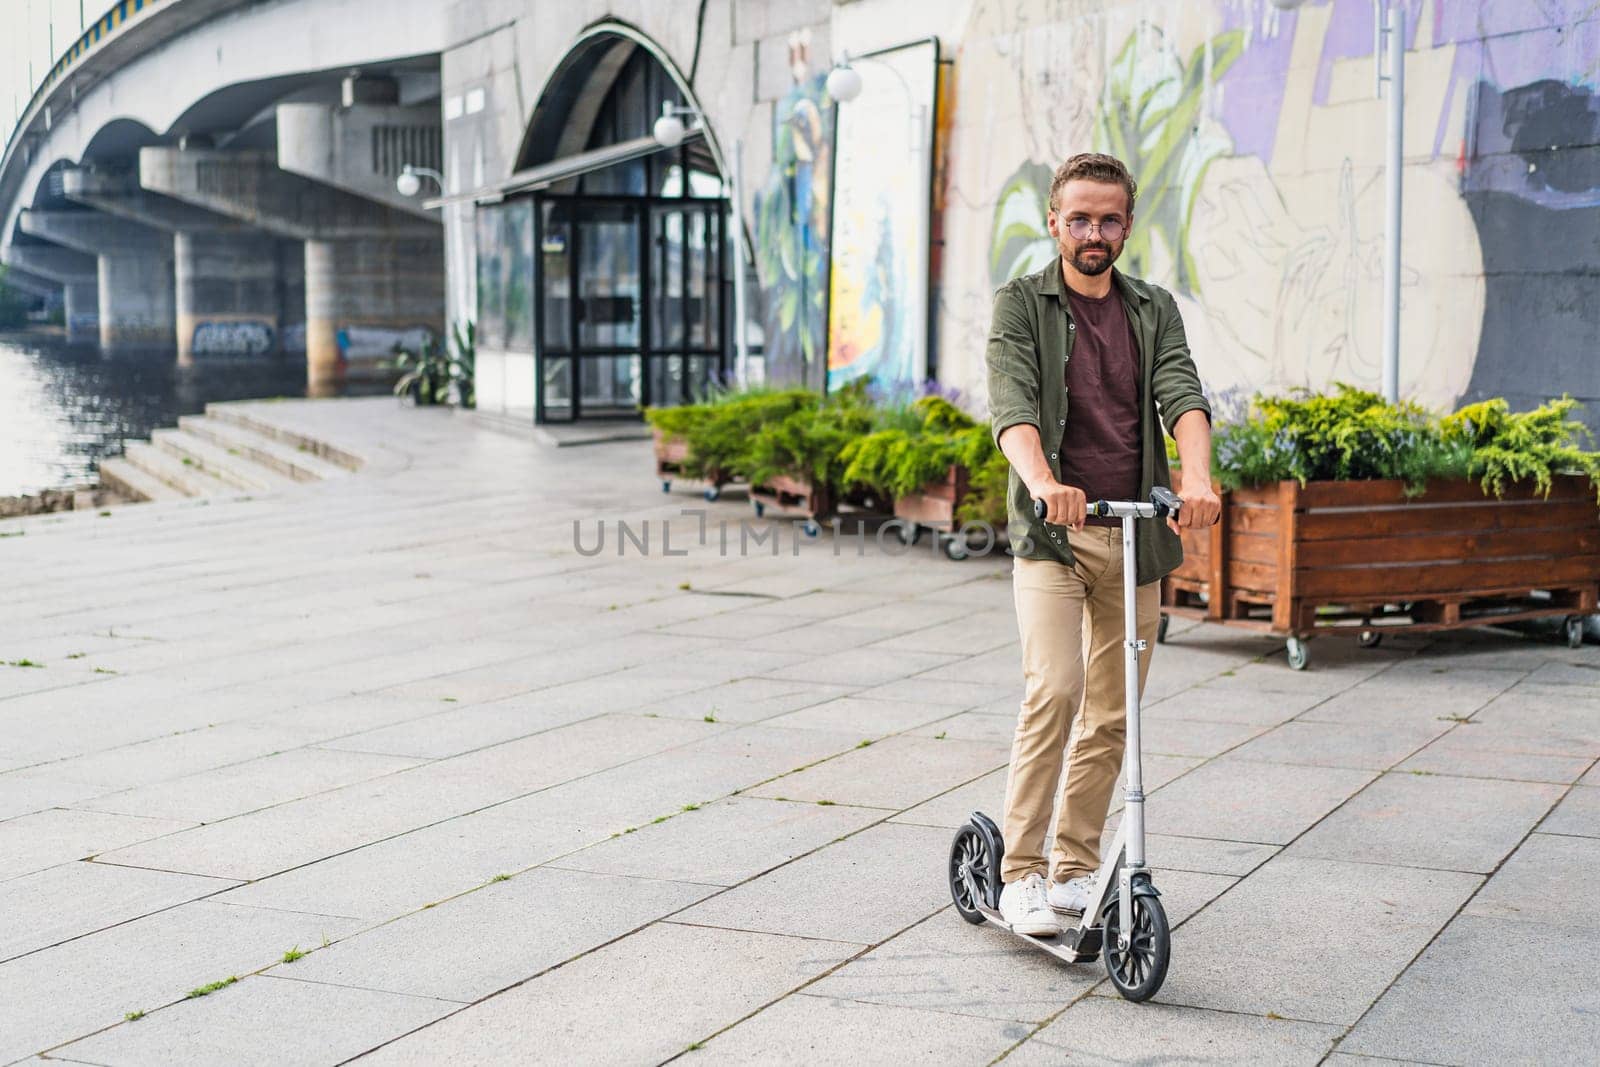 Man riding a scooter as he commutes home from work. The concept of a new city vehicle is embodied by this eco-friendly and efficient mode of transportation. With the urban cityscape in the background. by LipikStockMedia